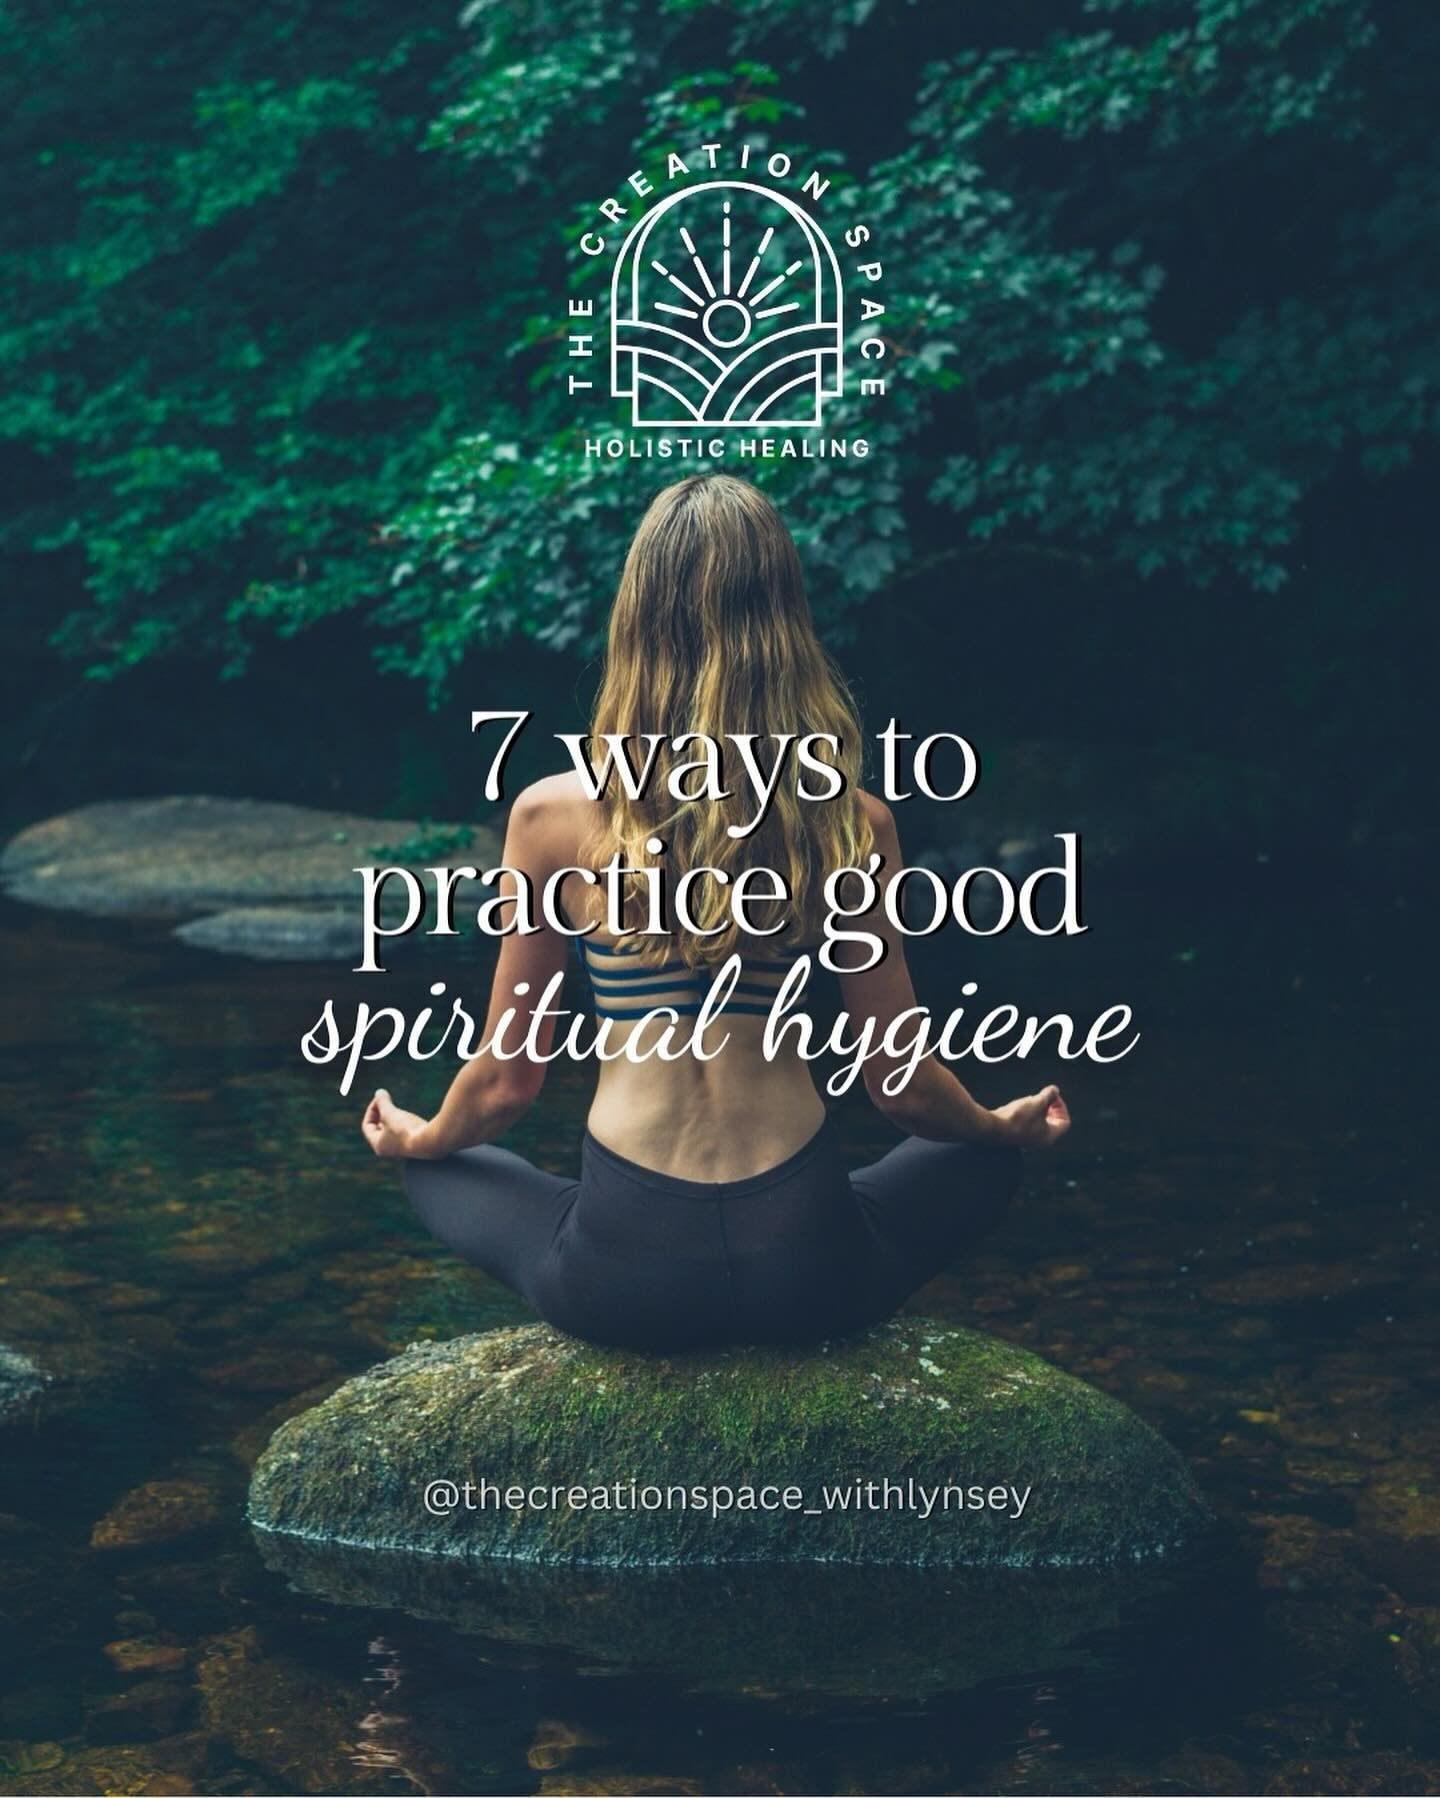 Our spiritual hygiene refers to the practices we adopt to cleanse and protect our energy 💚
⠀⠀⠀⠀⠀⠀⠀⠀⠀
For a closer look at energy clearing tools and their uses, check out my &lsquo;How to Stay High Vibe&rsquo; guide and bonus meditation in my online 